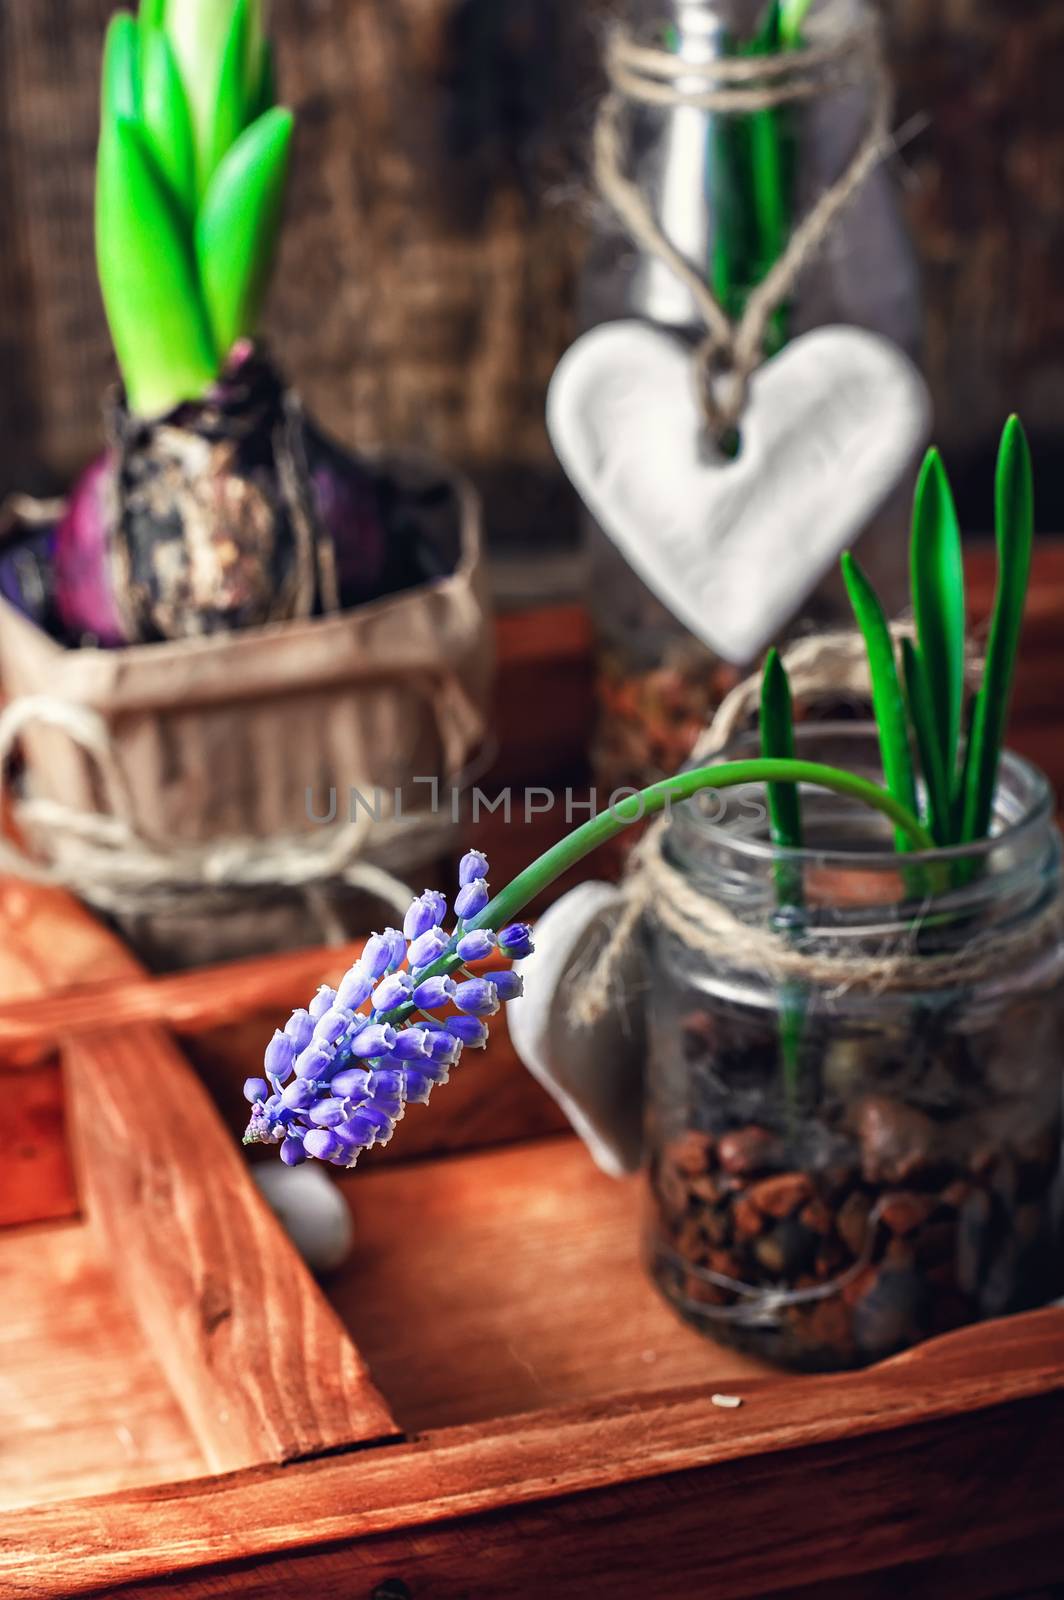 Hyacinth flowers and sprouts in glass jars in wooden box